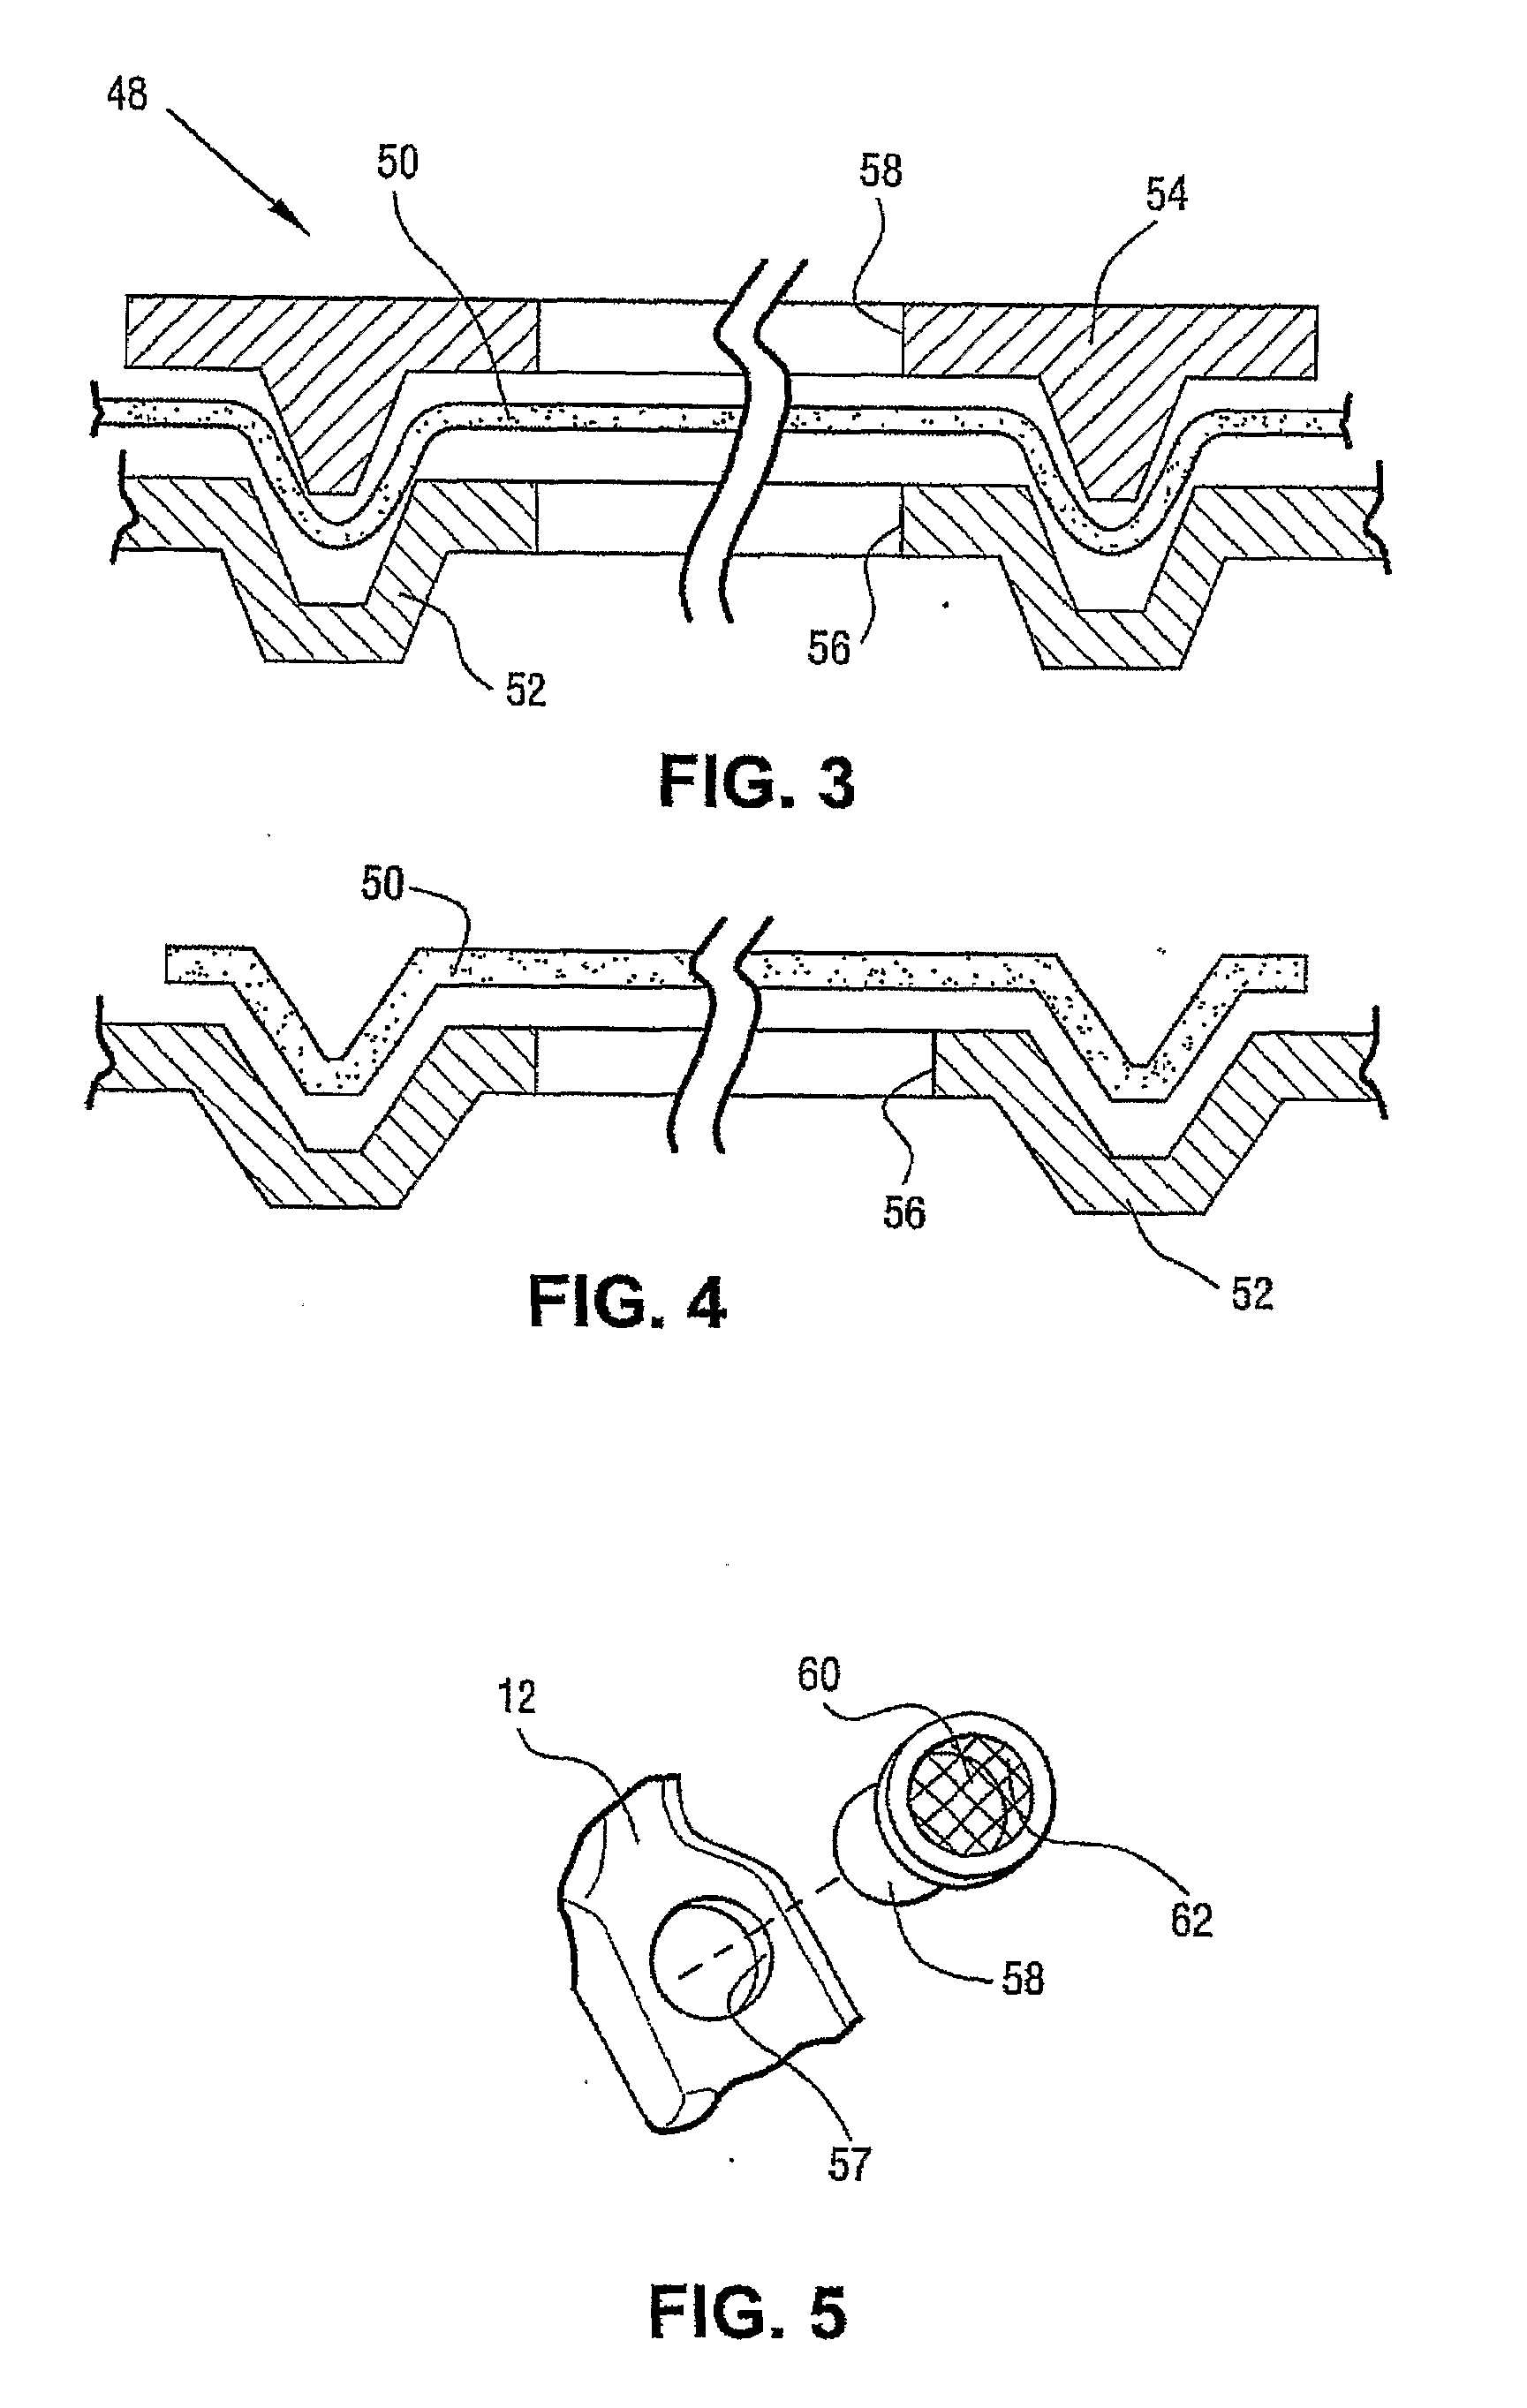 Method and Apparatus for Managing Moisture Buildup In Pressurised Breathing Systems